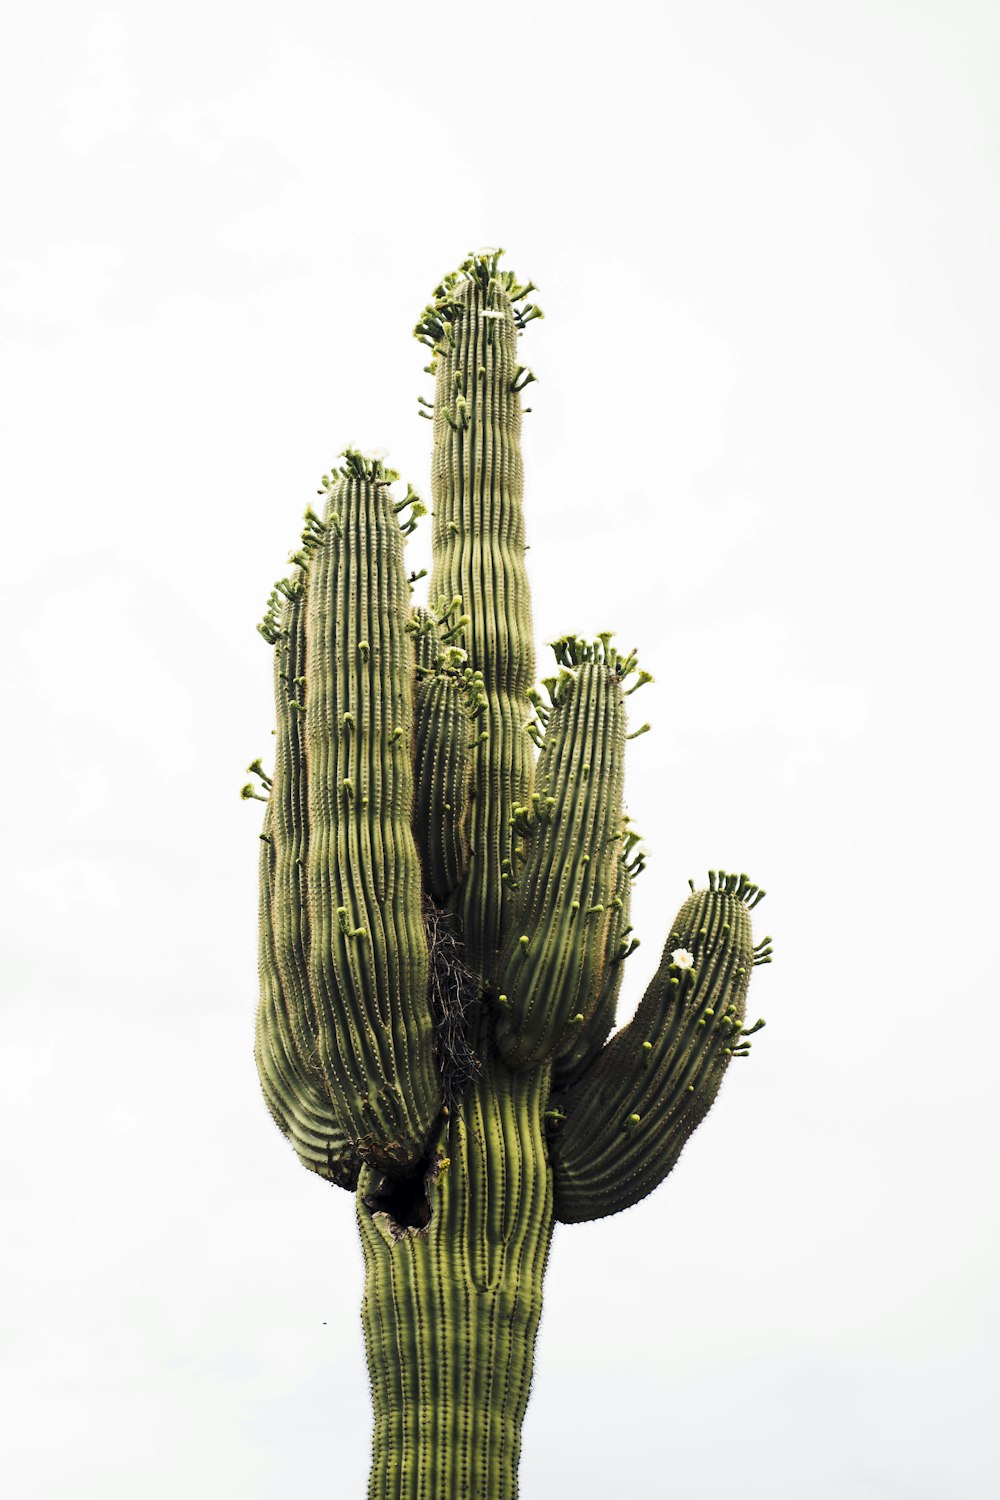 green cactus plant in grayscale photography